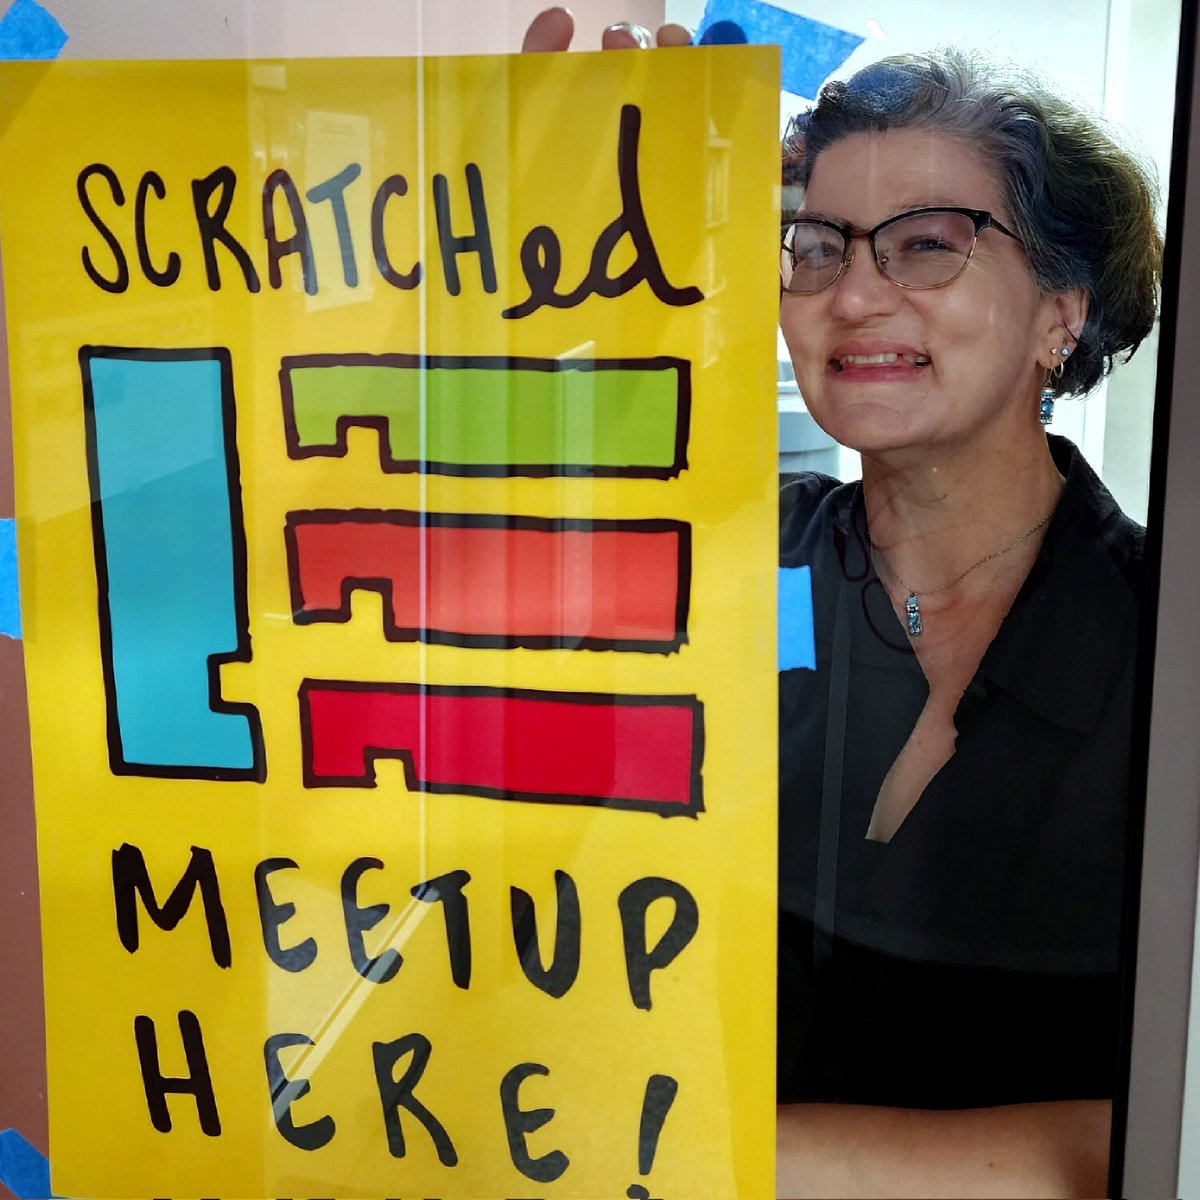 Setting up for our last #ScratchEdMeetup of SY2223 at the Jungman Library! Excited to share our recent projects centered on @microbit_edu & @makeymakey and learn what others are working on.
@scratch #CreativeComputing @kboyceq